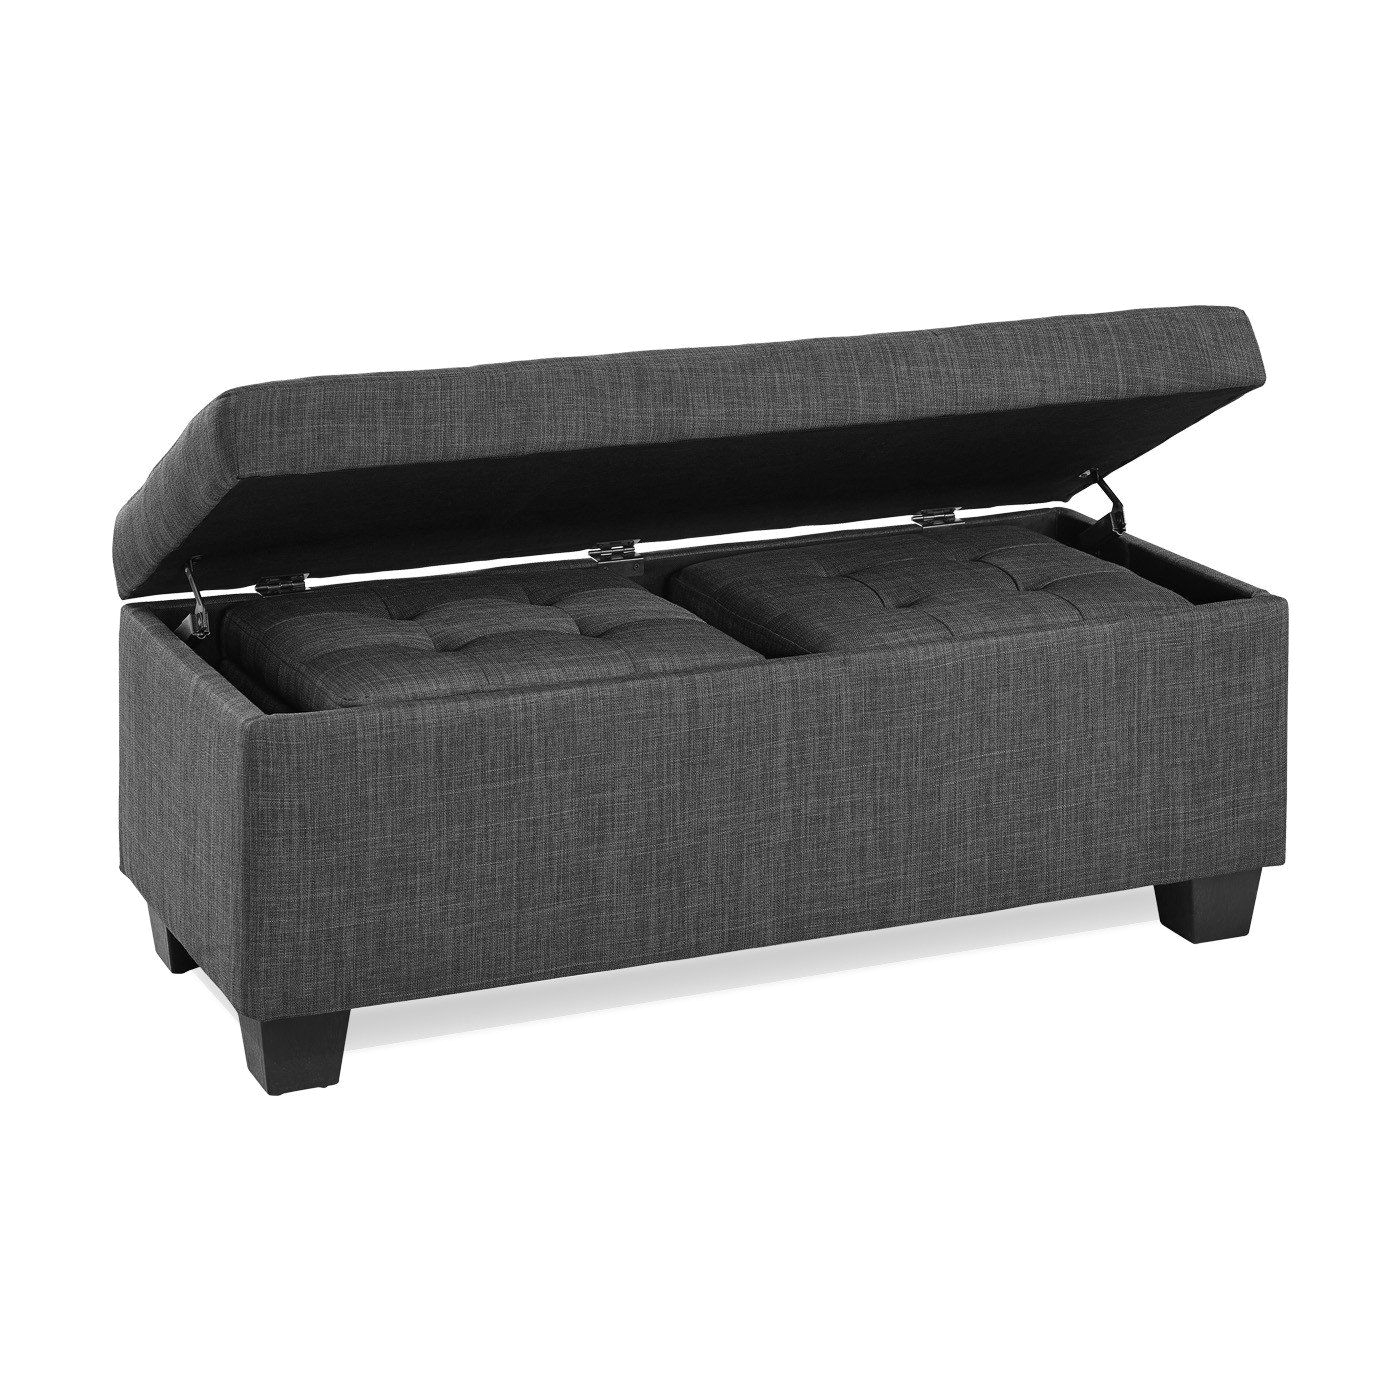 The Myra storage ottomans bring functionality and style to any space plete with one large and two smaller ottomans the chic tufted top and lavish